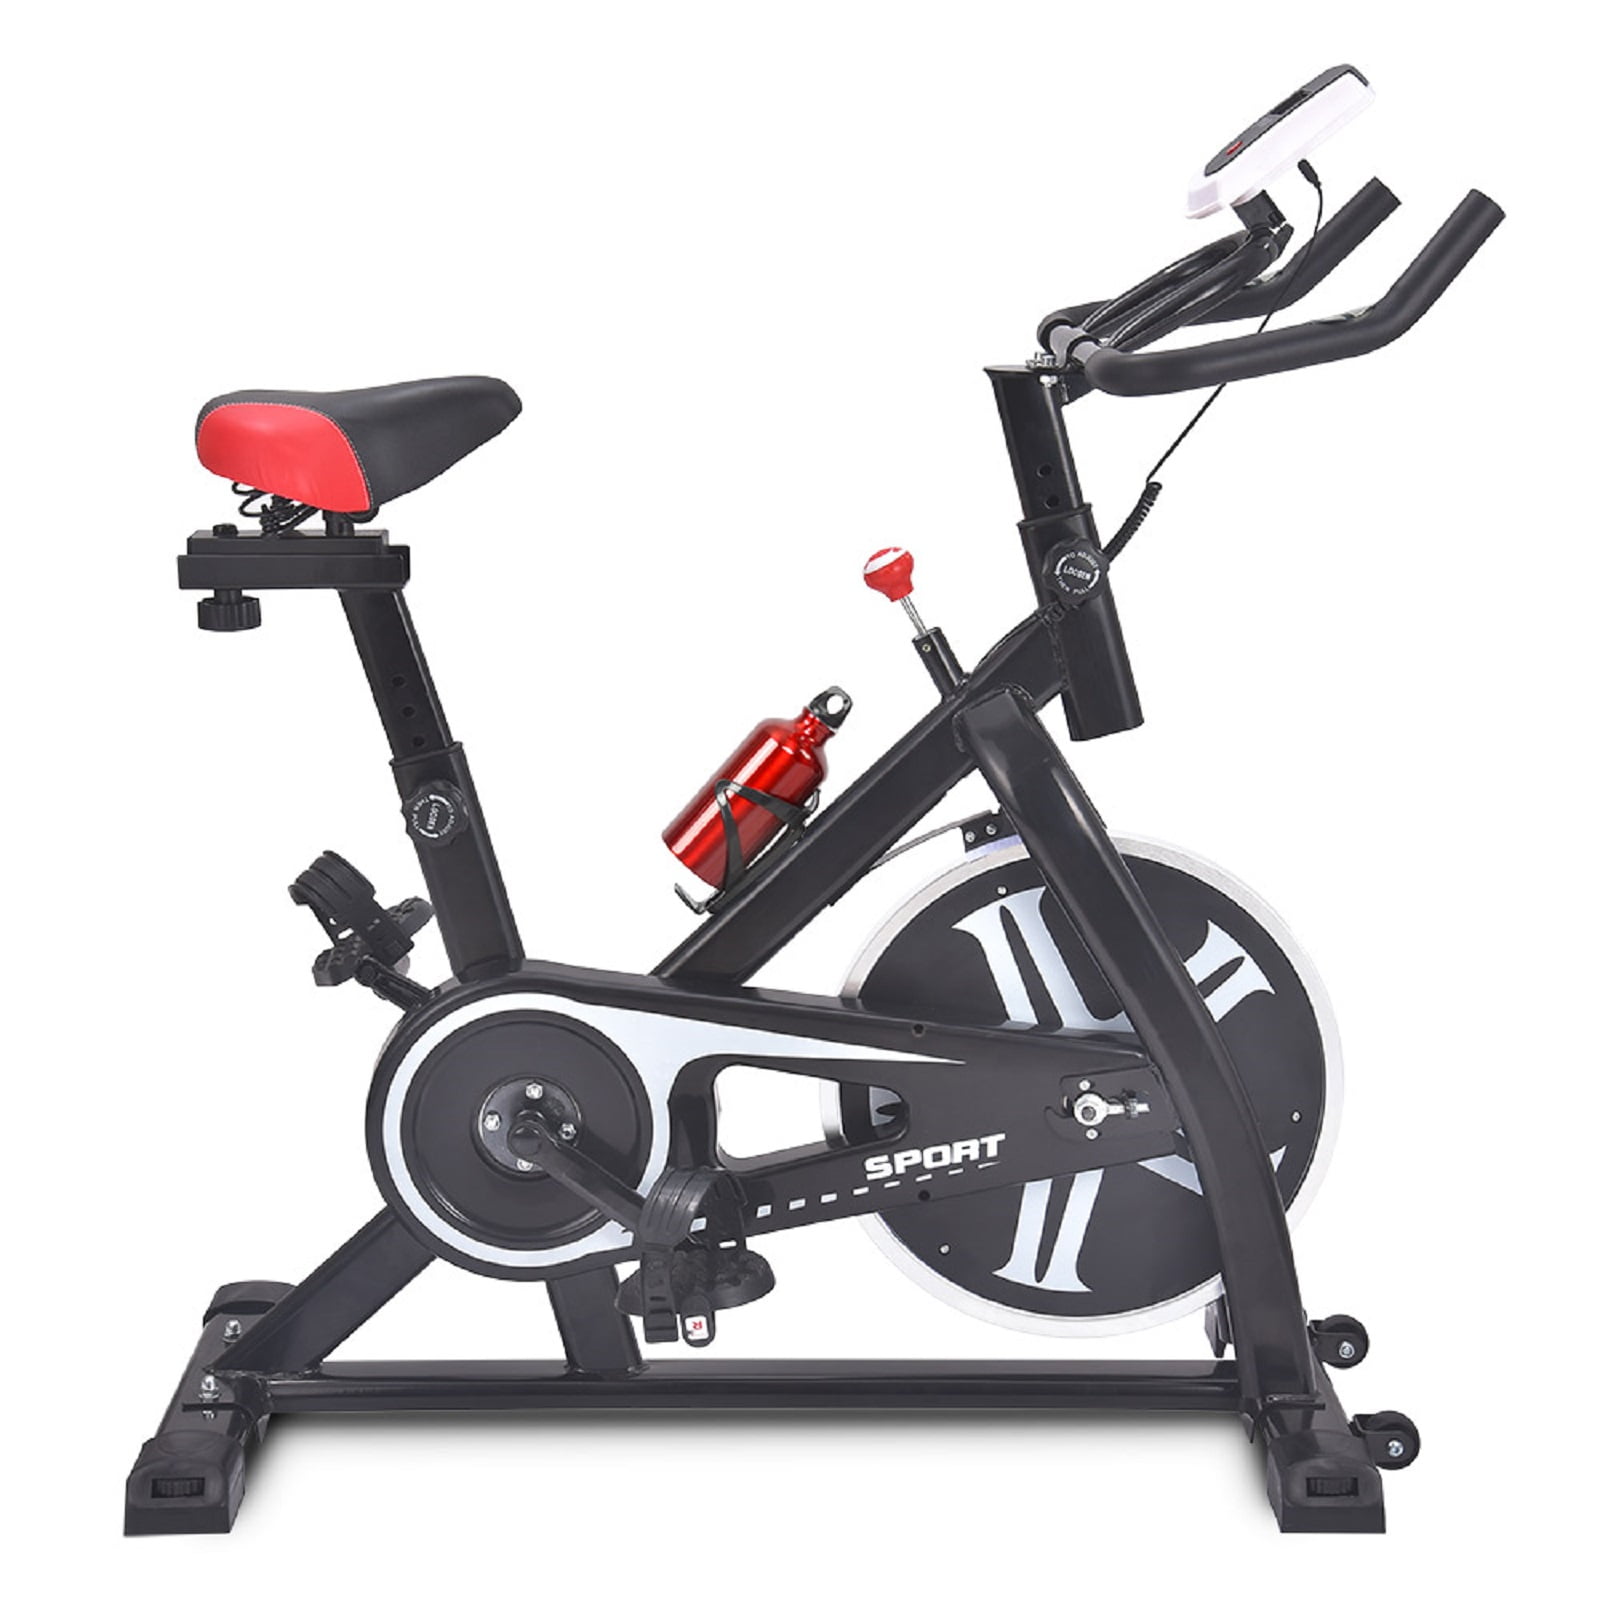 Indoor Cycling Bicycle Cardio Home Workout Gym Fitness Exercise Stationary Bike